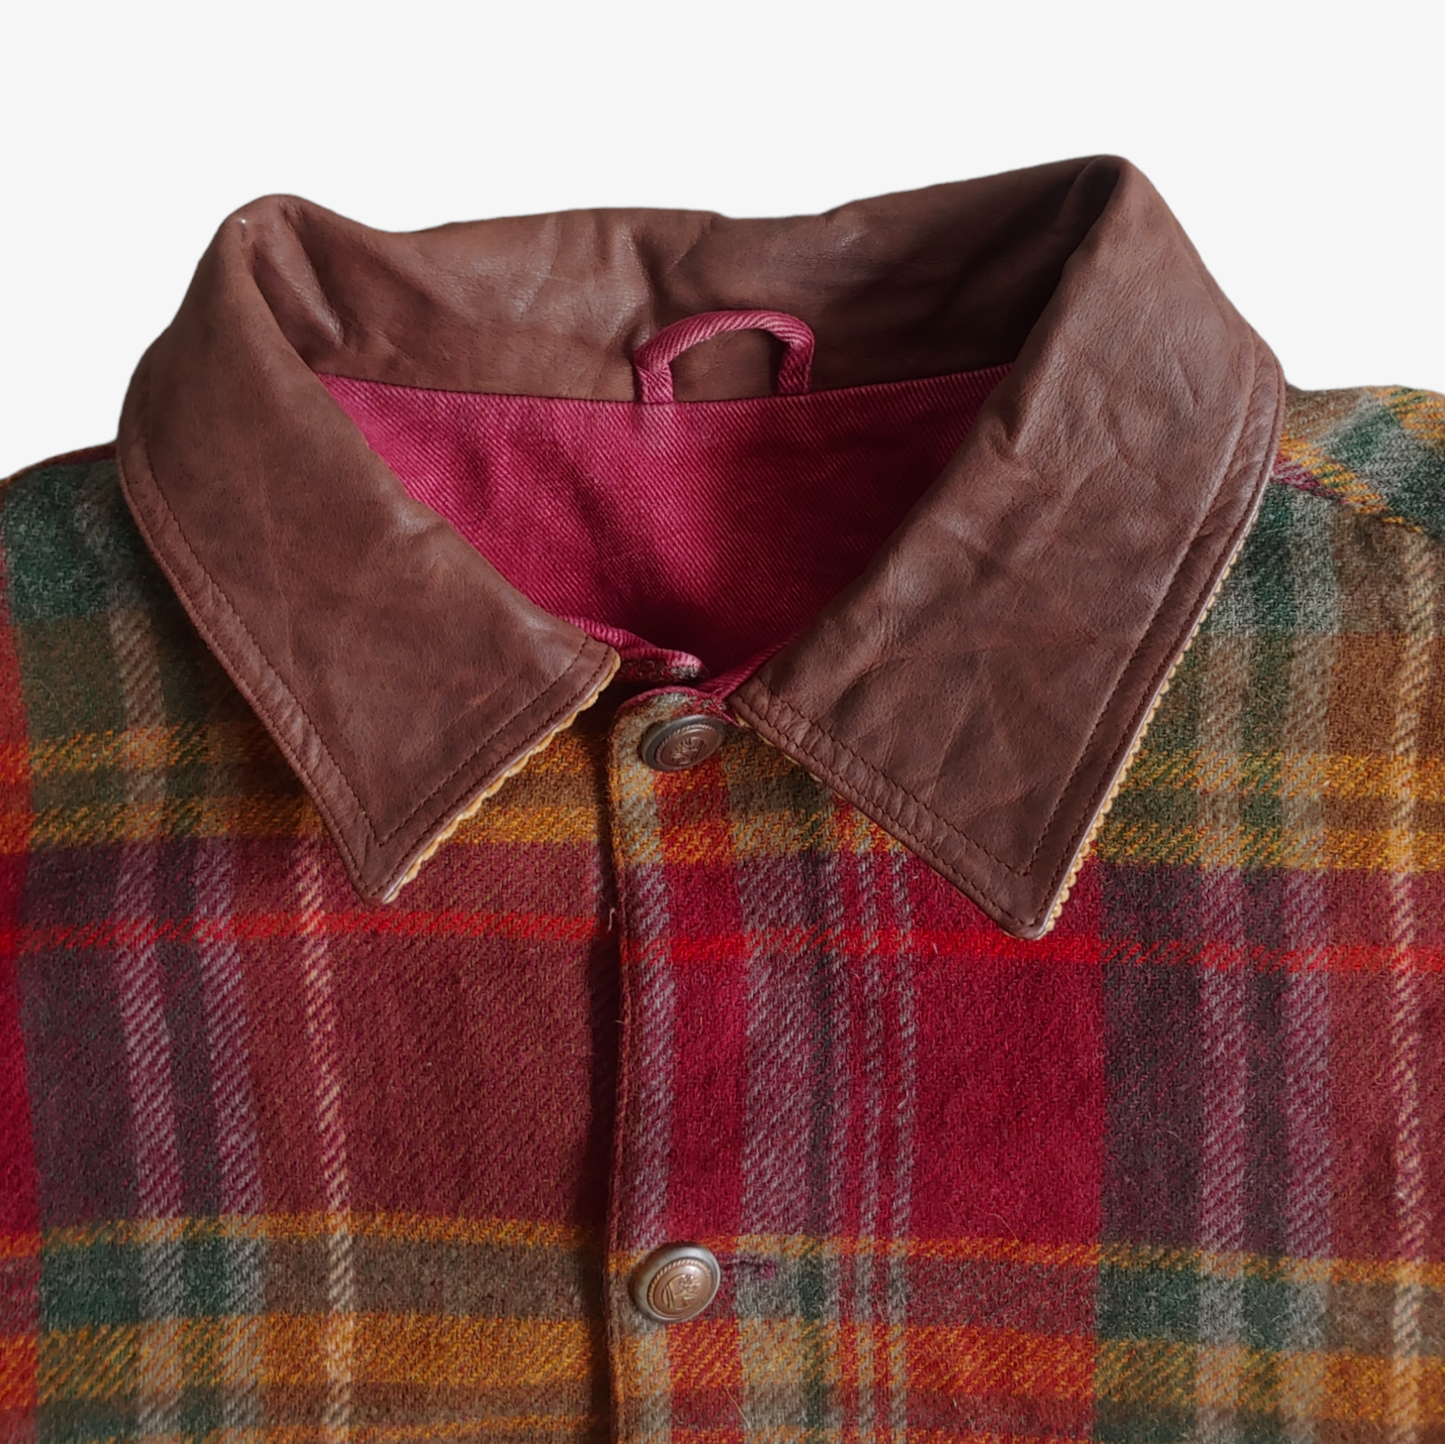 Vintage 90s Timberland Reversible Wool Check Workwear Jacket Leather Collar - Casspios Dream